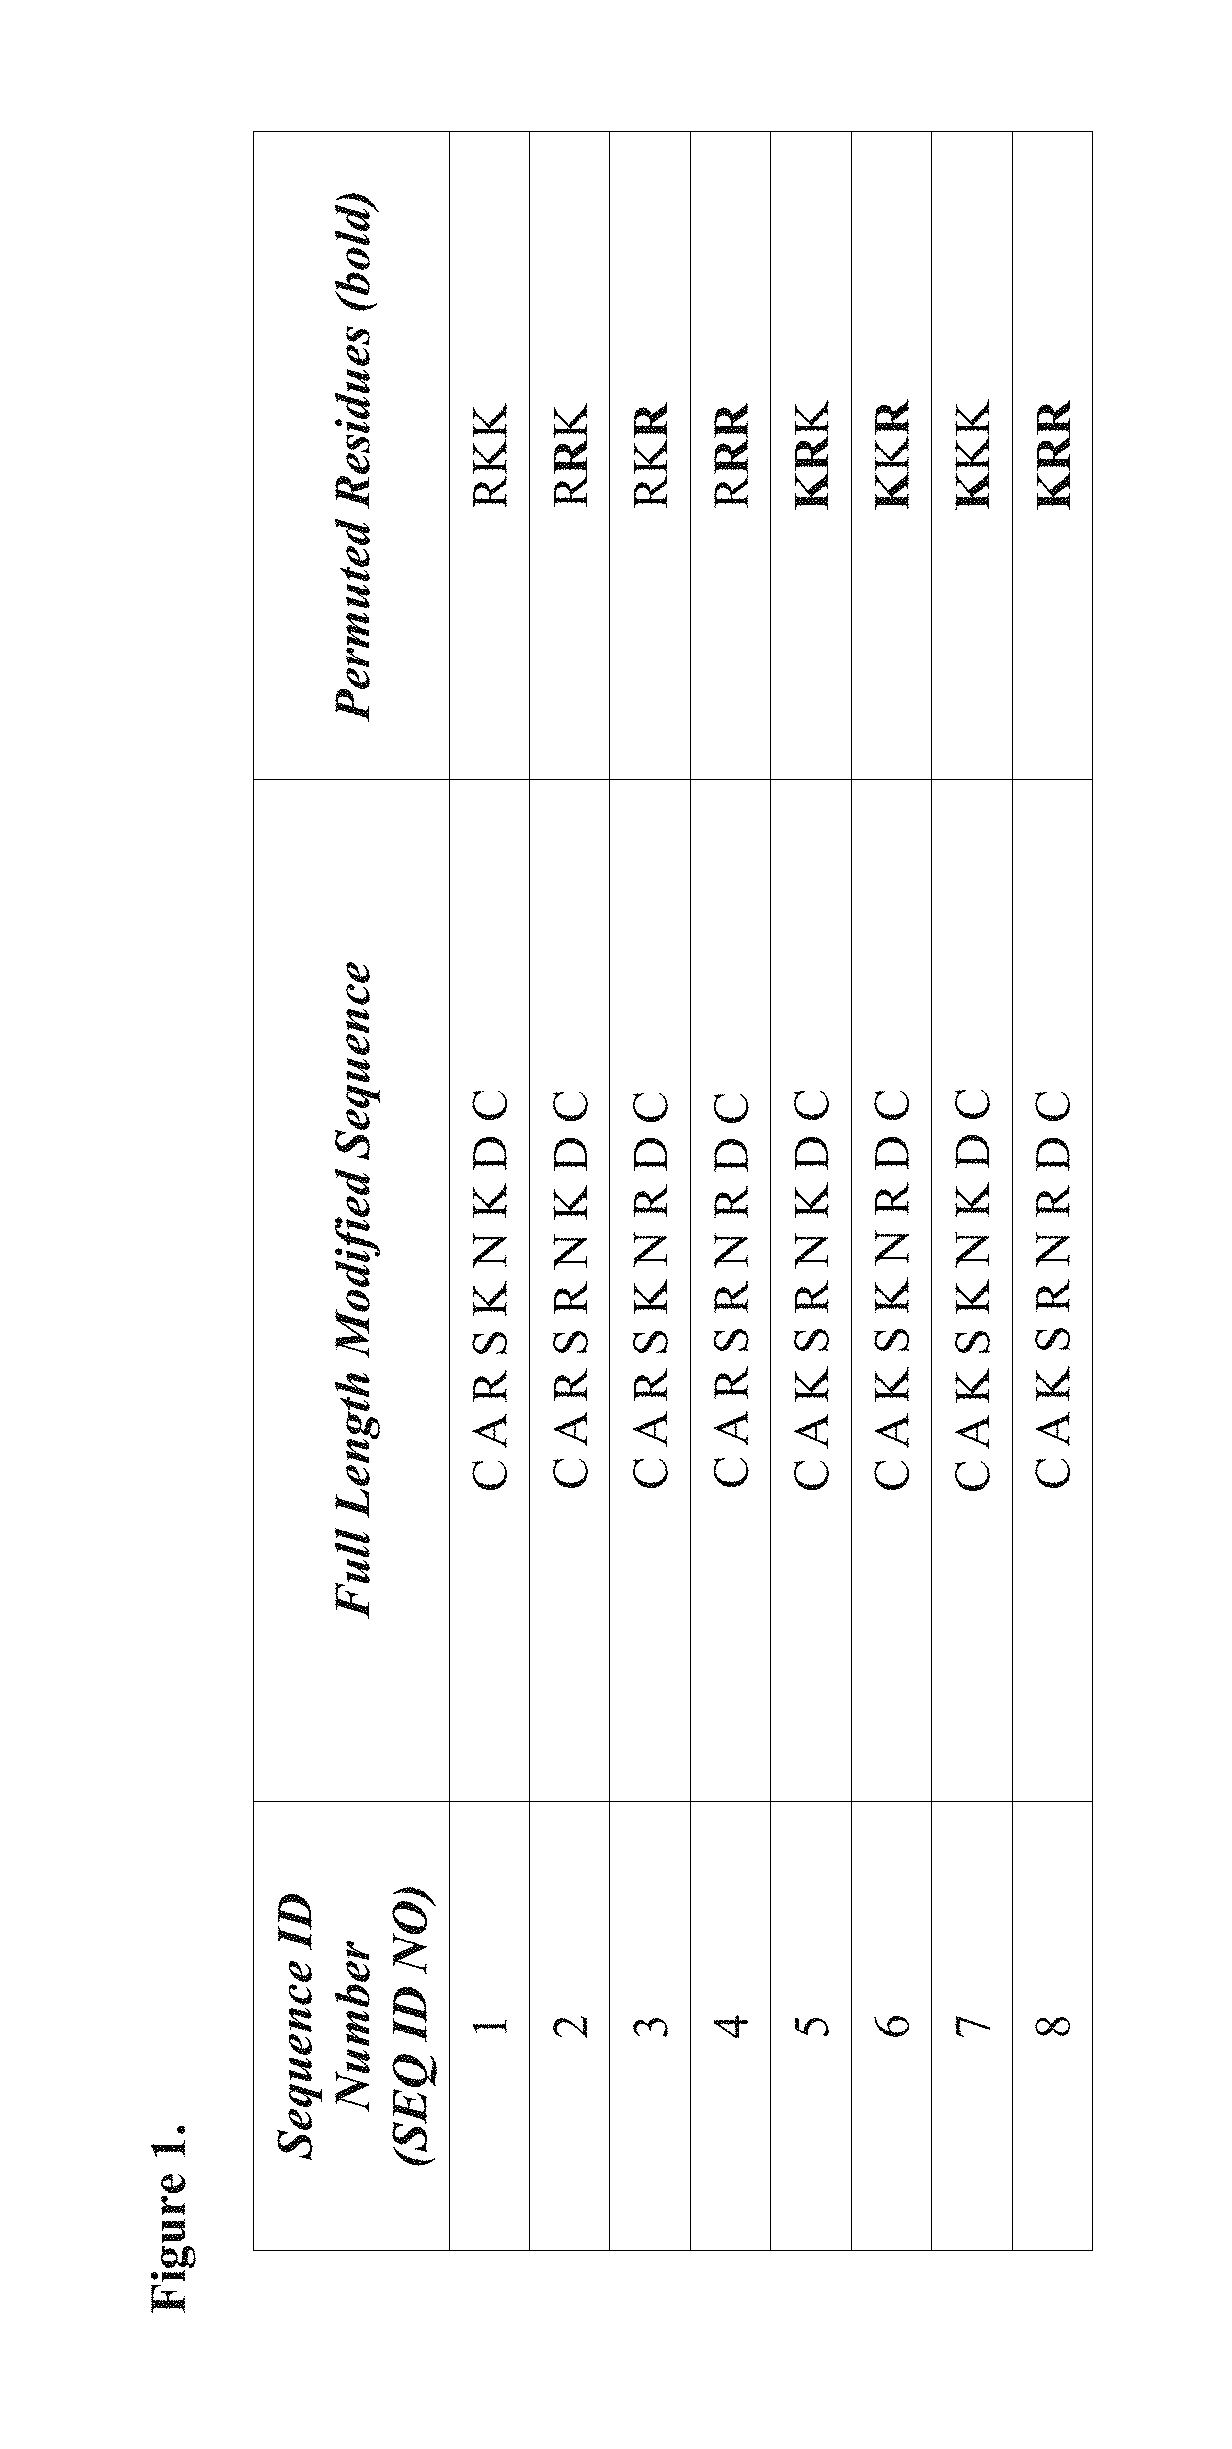 Compositions Containing a Pharmacophore with Selectivity to Diseased Tissue and Methods of Making Same